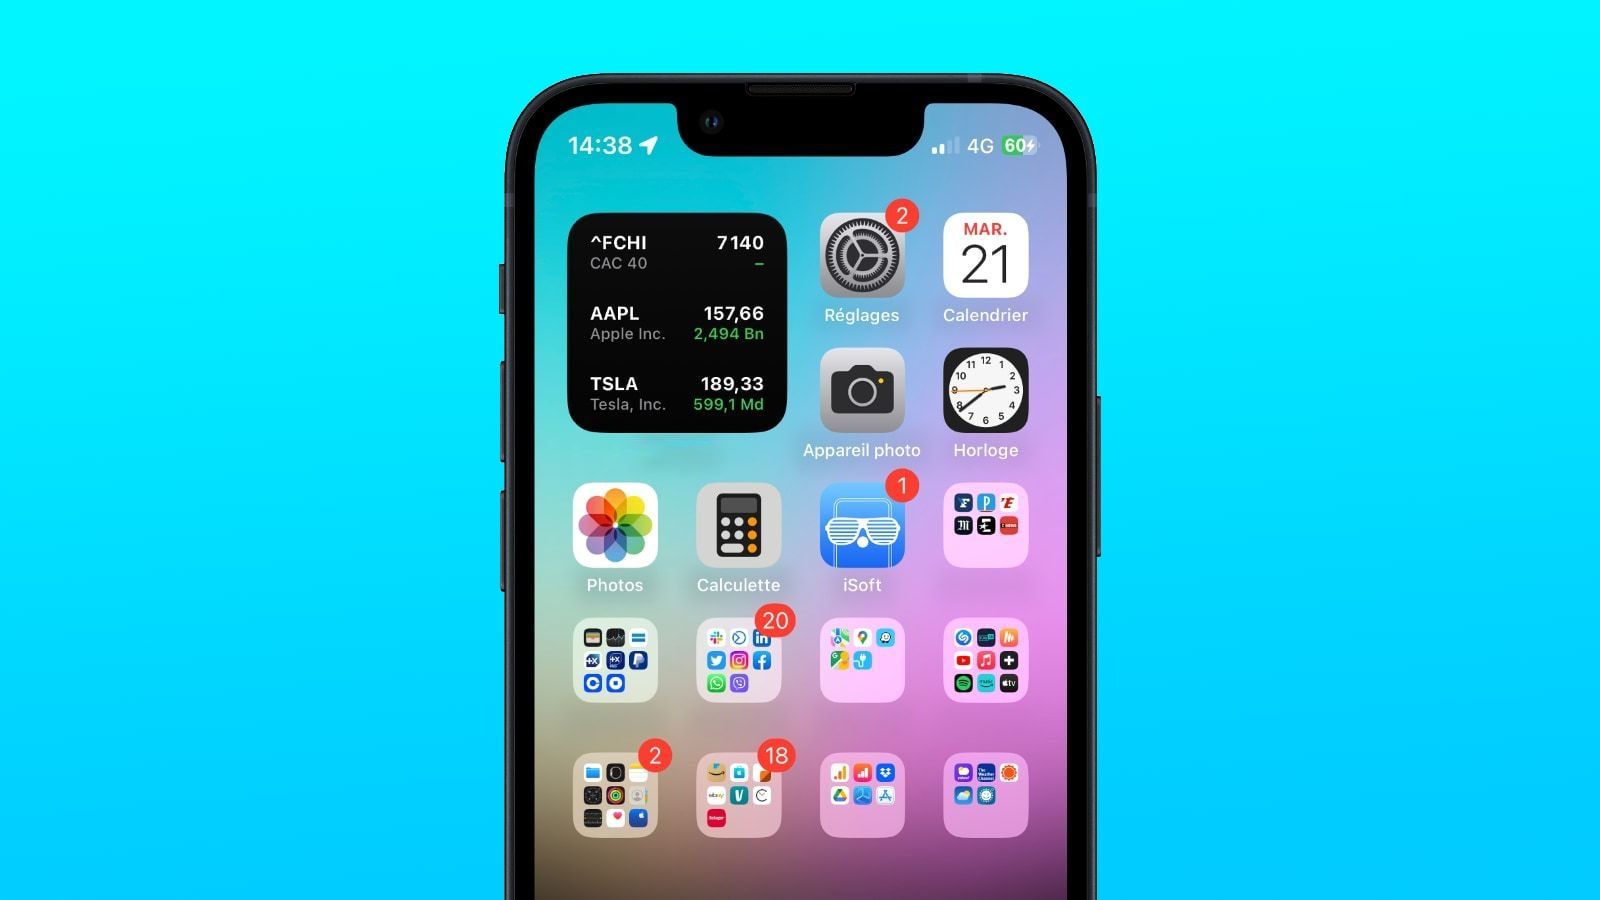 StealthHome hides items from iPhone home screen